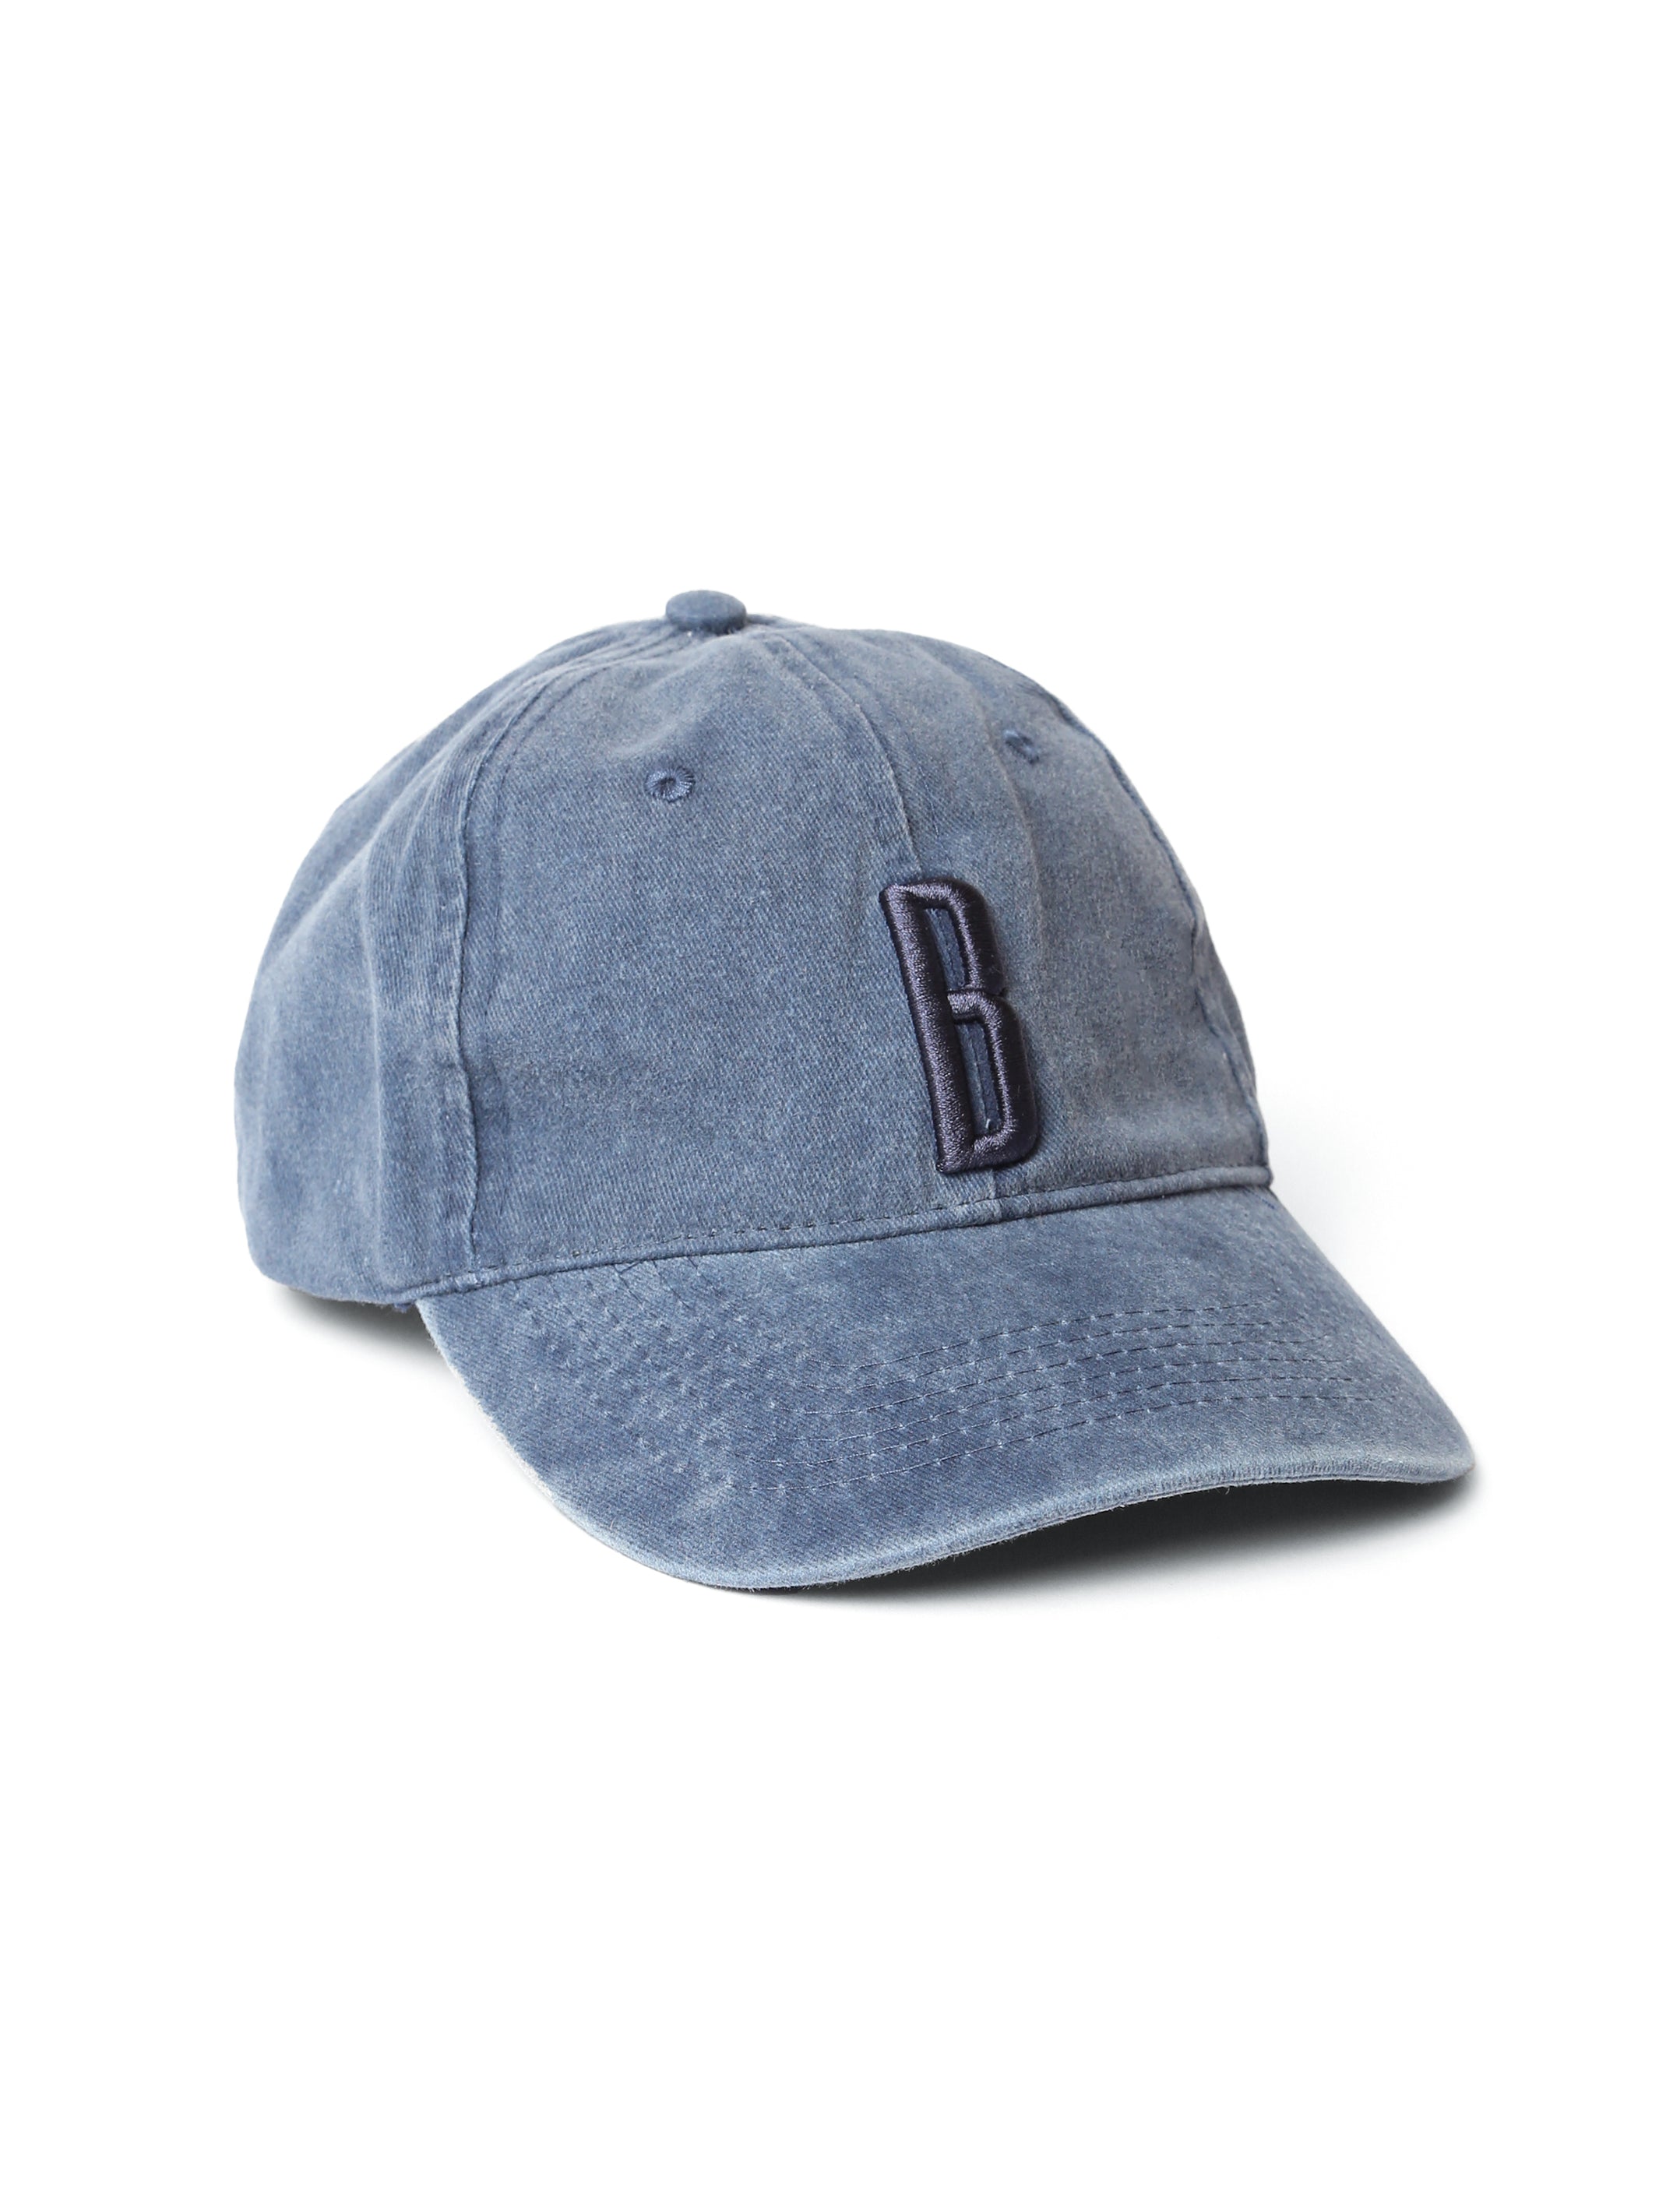 Embroidered Cap in Navy Blue - BROOKLYN INDUSTRIES